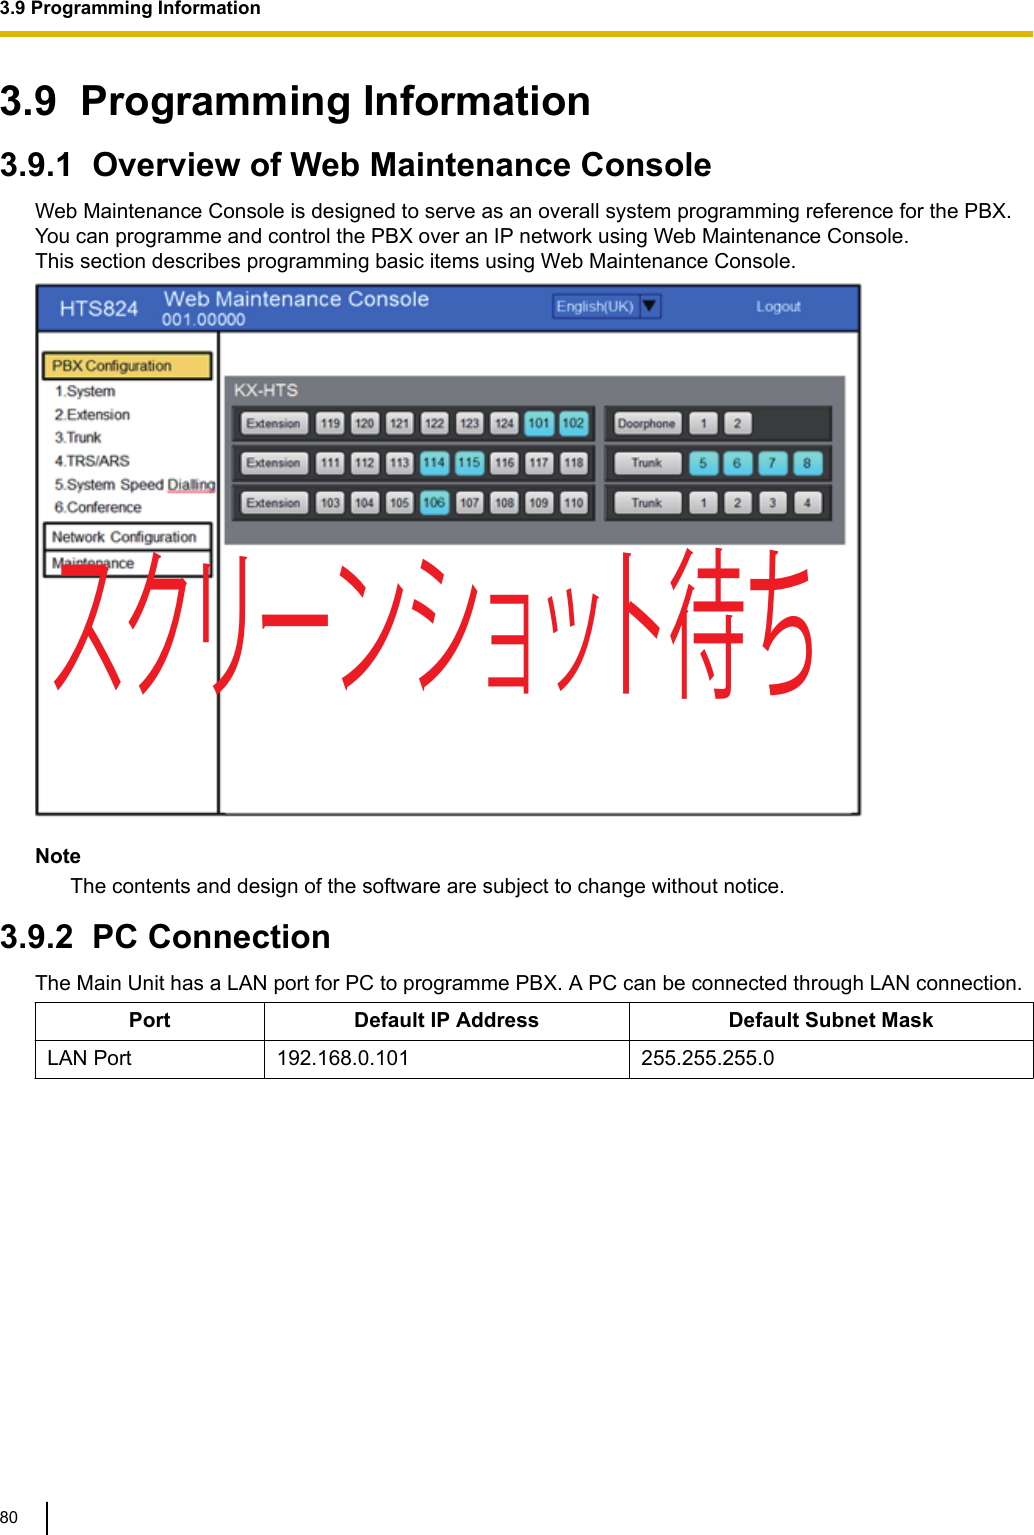 3.9  Programming Information3.9.1  Overview of Web Maintenance ConsoleWeb Maintenance Console is designed to serve as an overall system programming reference for the PBX.You can programme and control the PBX over an IP network using Web Maintenance Console.This section describes programming basic items using Web Maintenance Console.スクリーンショット待ちNoteThe contents and design of the software are subject to change without notice.3.9.2  PC ConnectionThe Main Unit has a LAN port for PC to programme PBX. A PC can be connected through LAN connection.Port Default IP Address Default Subnet MaskLAN Port 192.168.0.101 255.255.255.03.9 Programming Information80